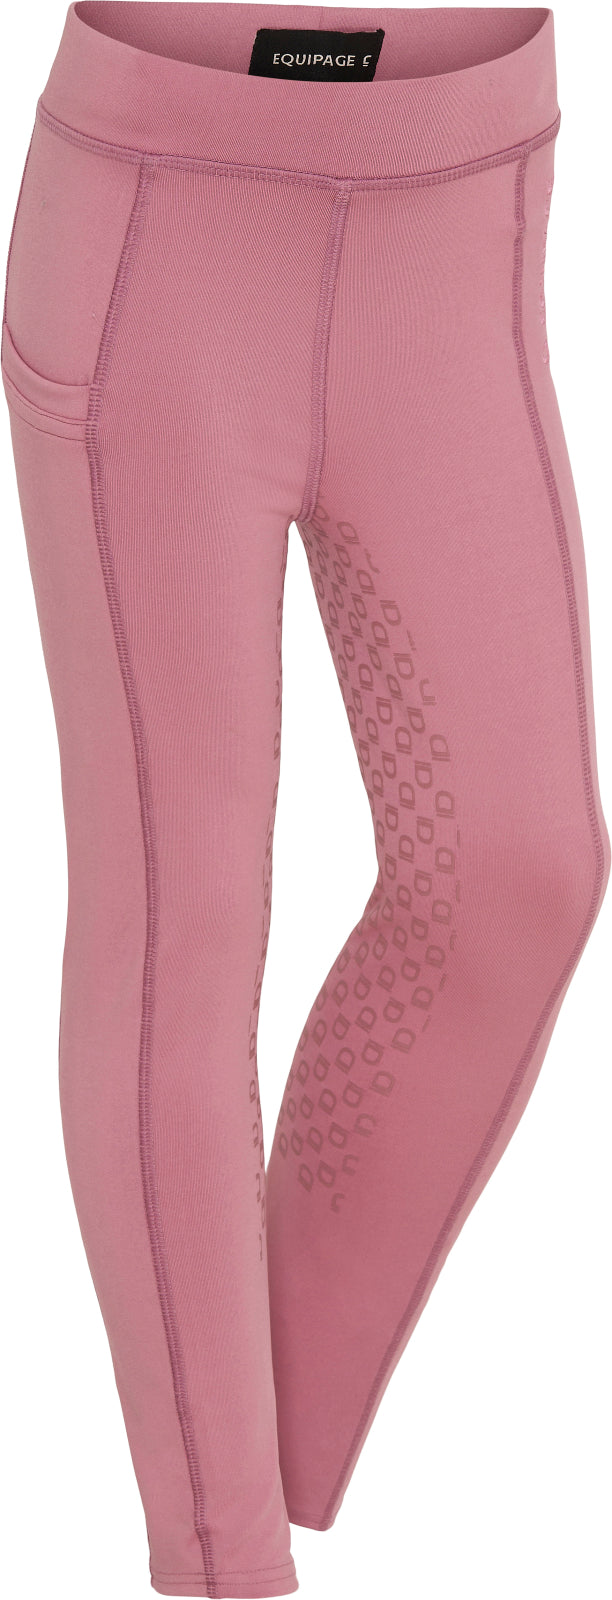 Equipage Molly fuld grip ridetights